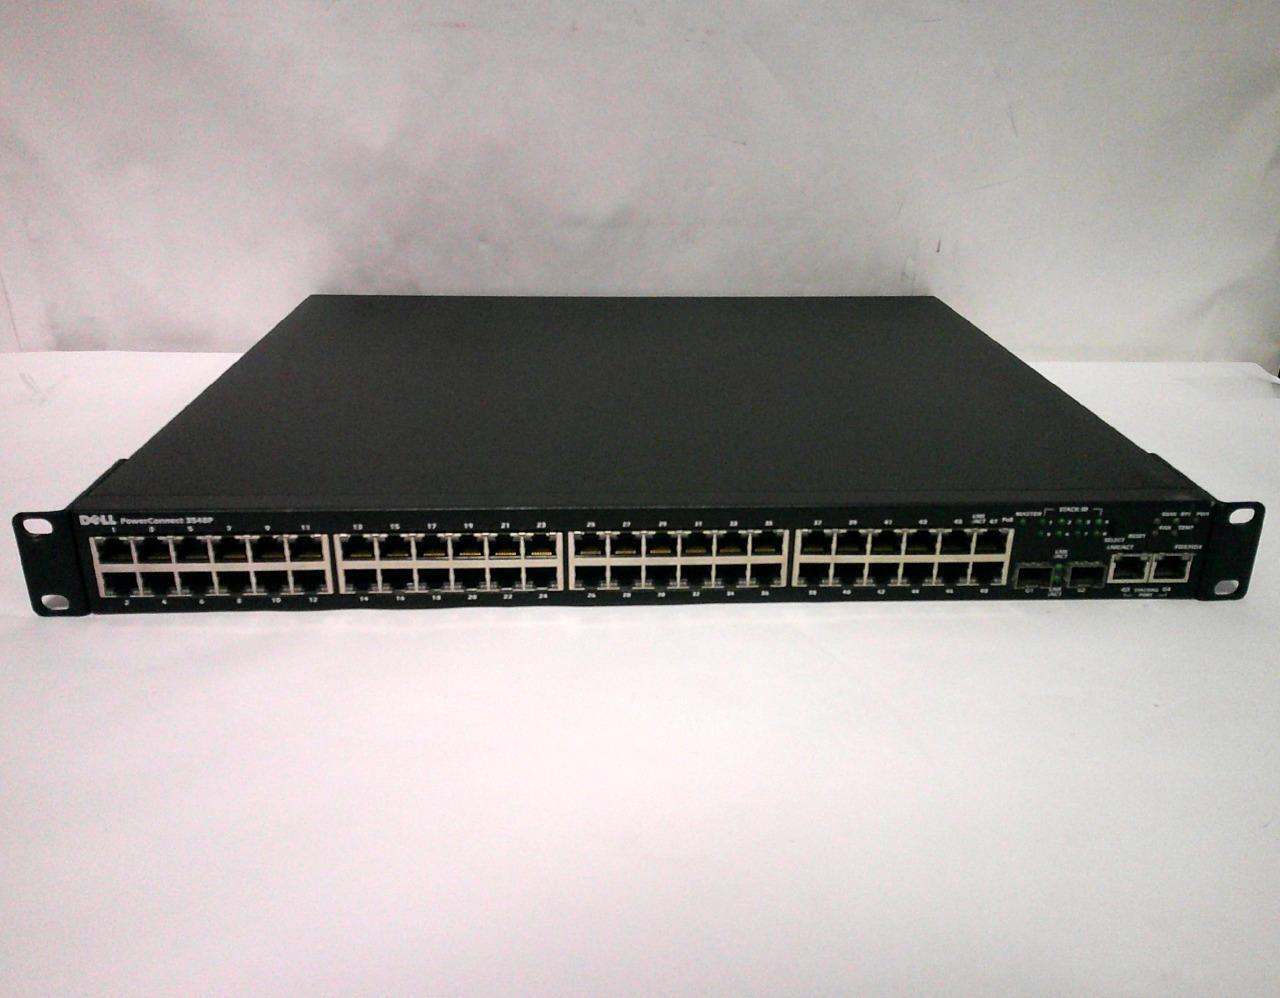 Dell PowerConnect 3548P 48-Port PoE Rack Mountable Managed Ethernet Switch